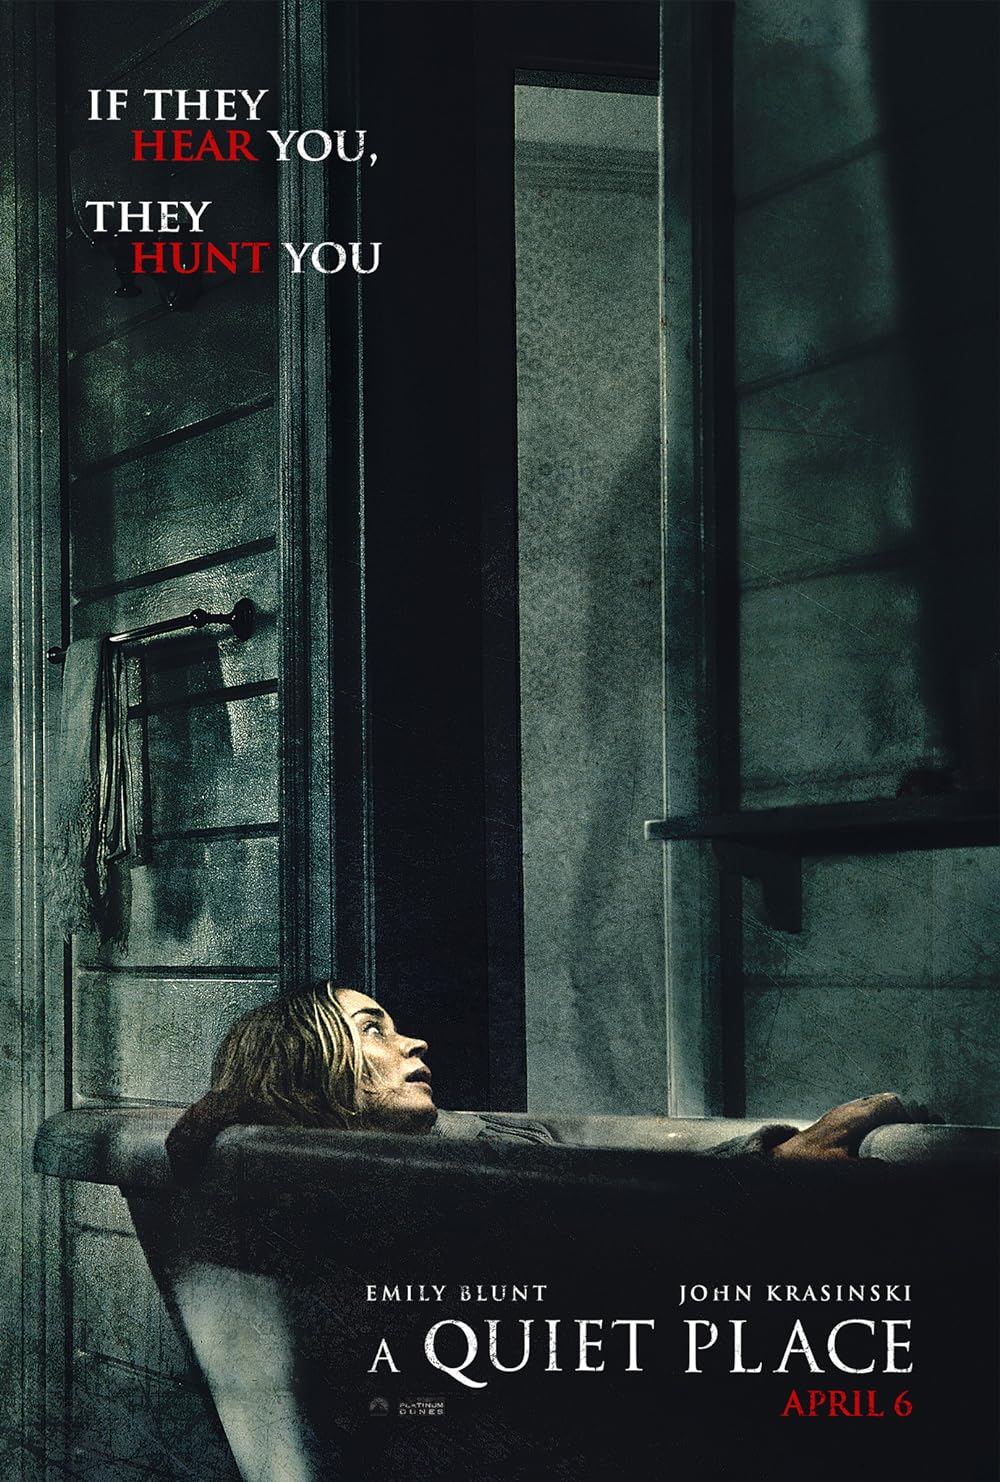 A Quiet Place is set in a world overrun by alien creatures with hypersensitive hearing. Humanity teeters on the edge of extinction, and the Abbott family survives by maintaining complete silence. Their fragile peace is threatened as they await the arrival of a new baby. The film features John Krasinski, Emily Blunt, Millicent Simmonds, and Noah Jupe, with Krasinski also directing.